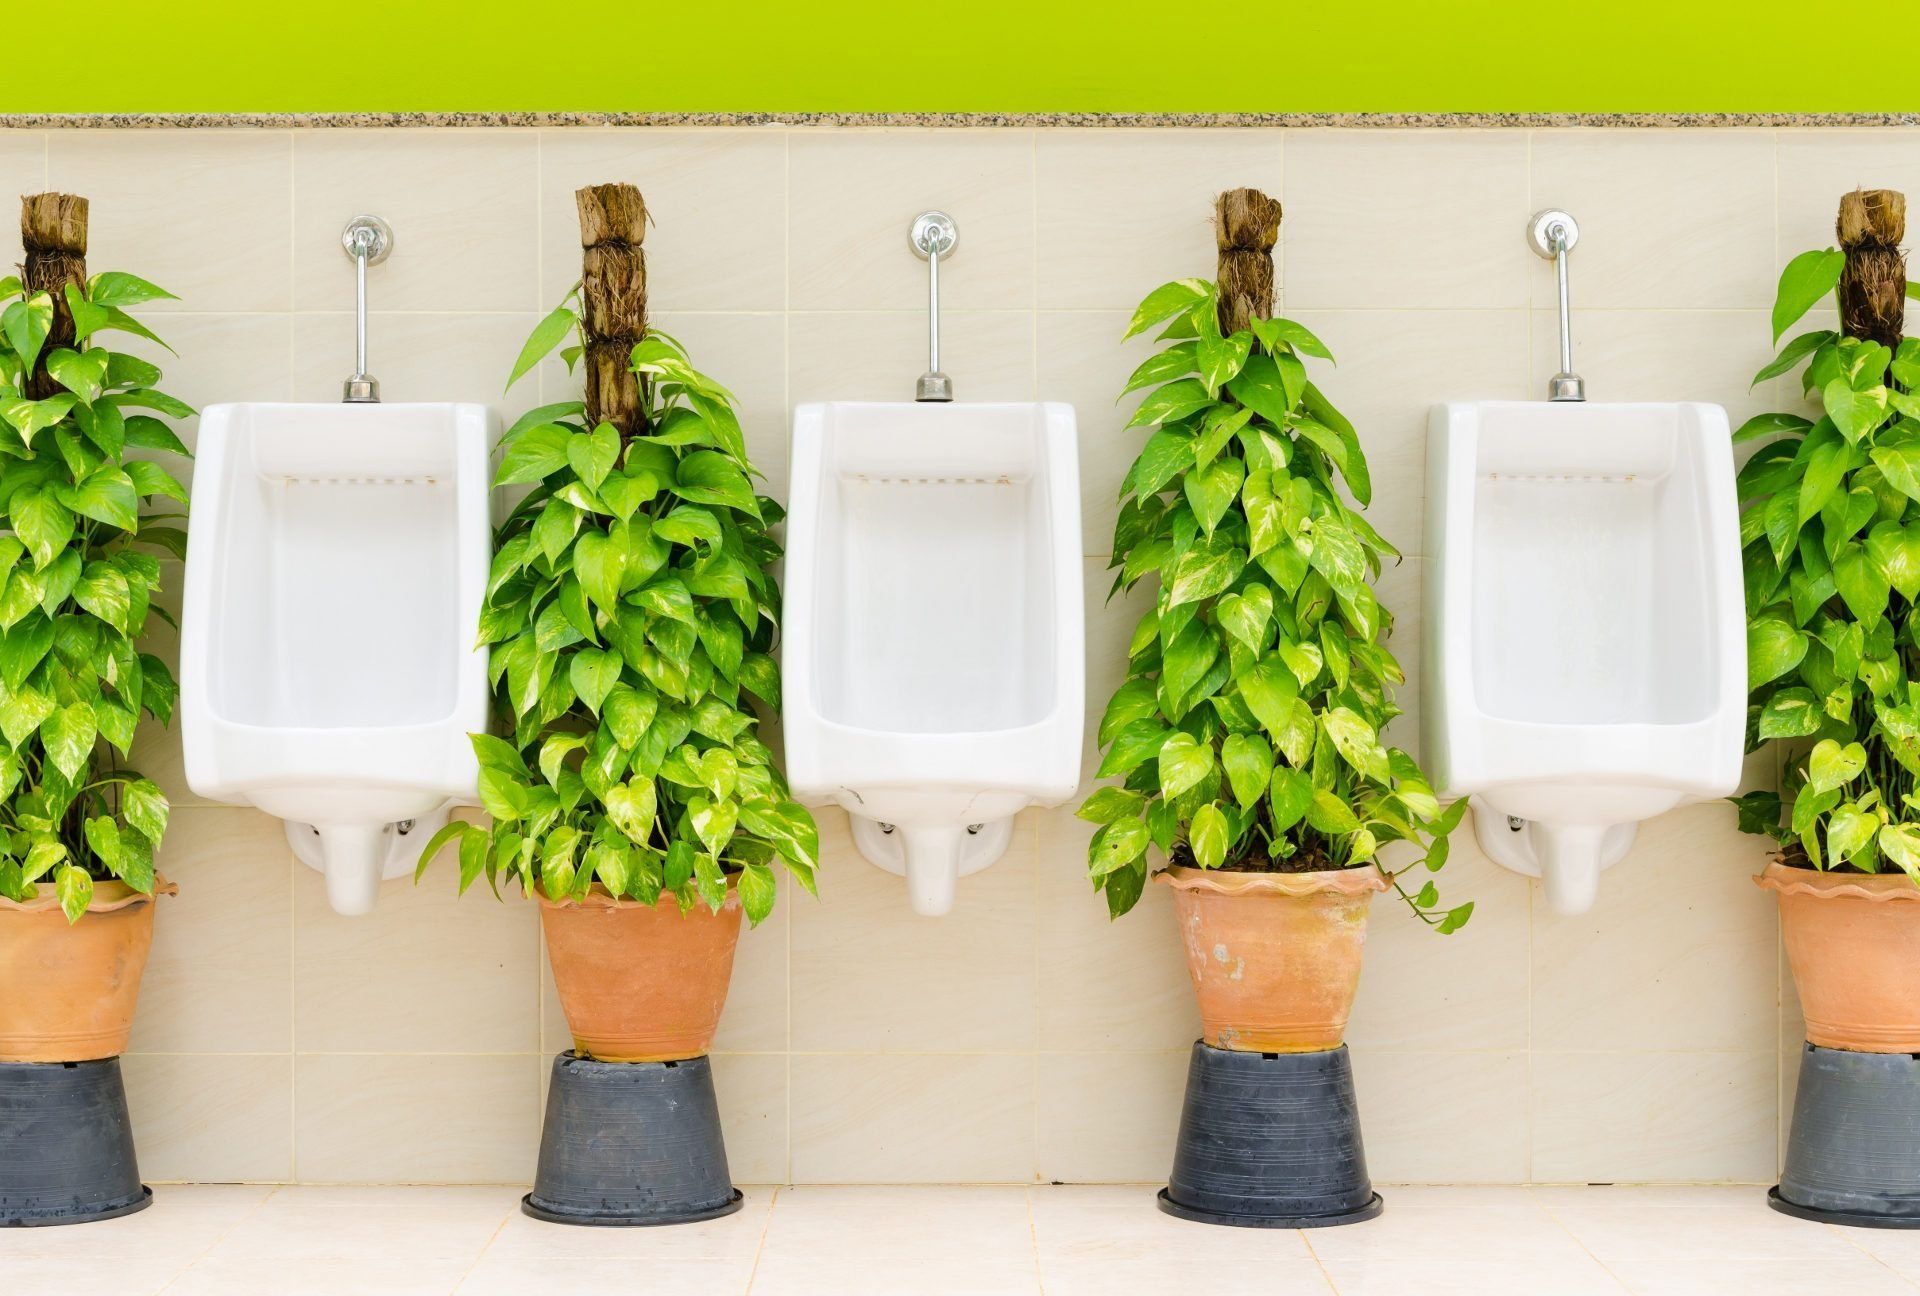 Rating of the best urinals 2020: how to choose